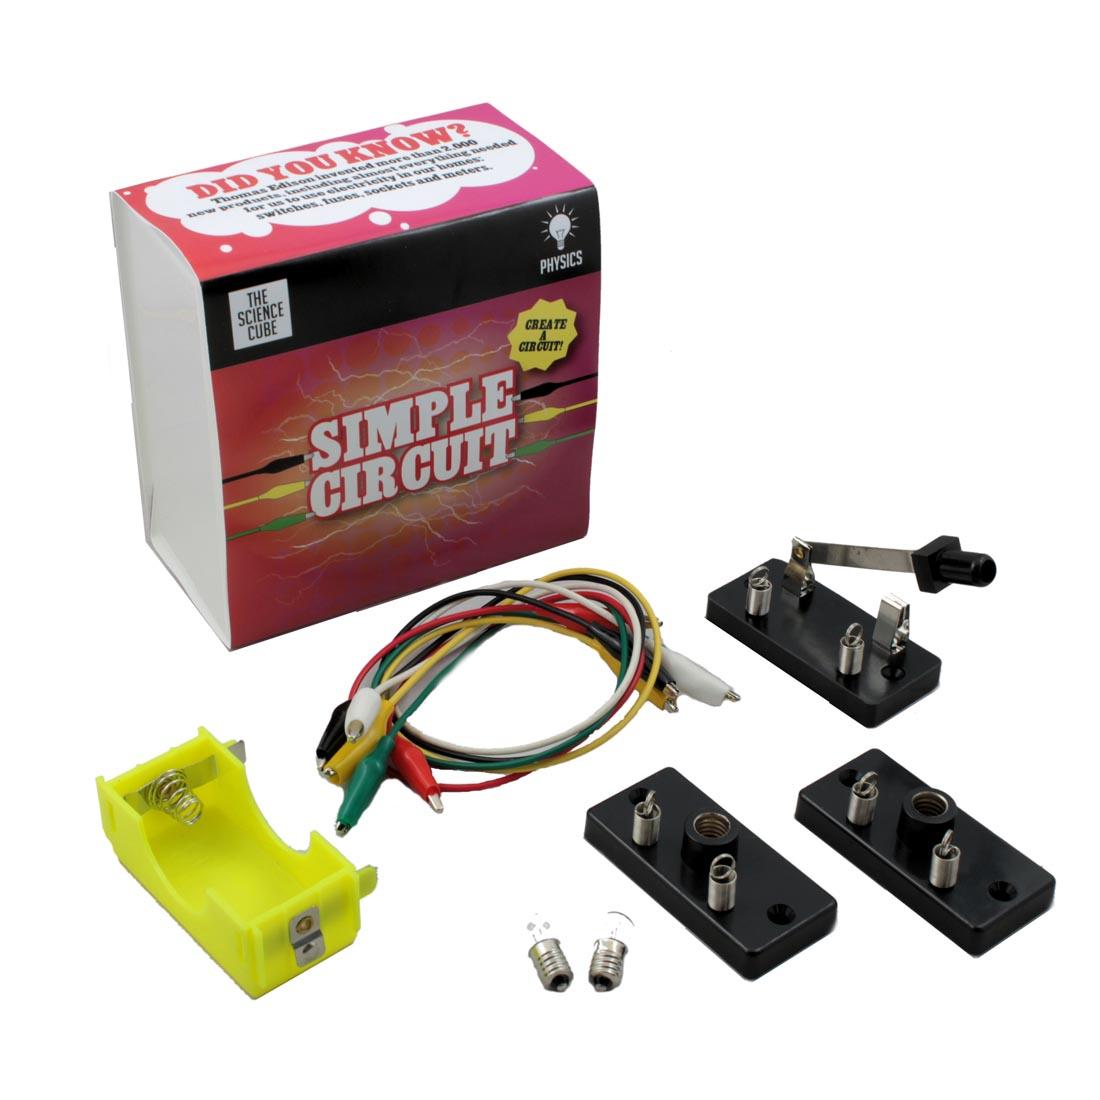 The Science Cube Simple Circuit Kit components shown outside the box